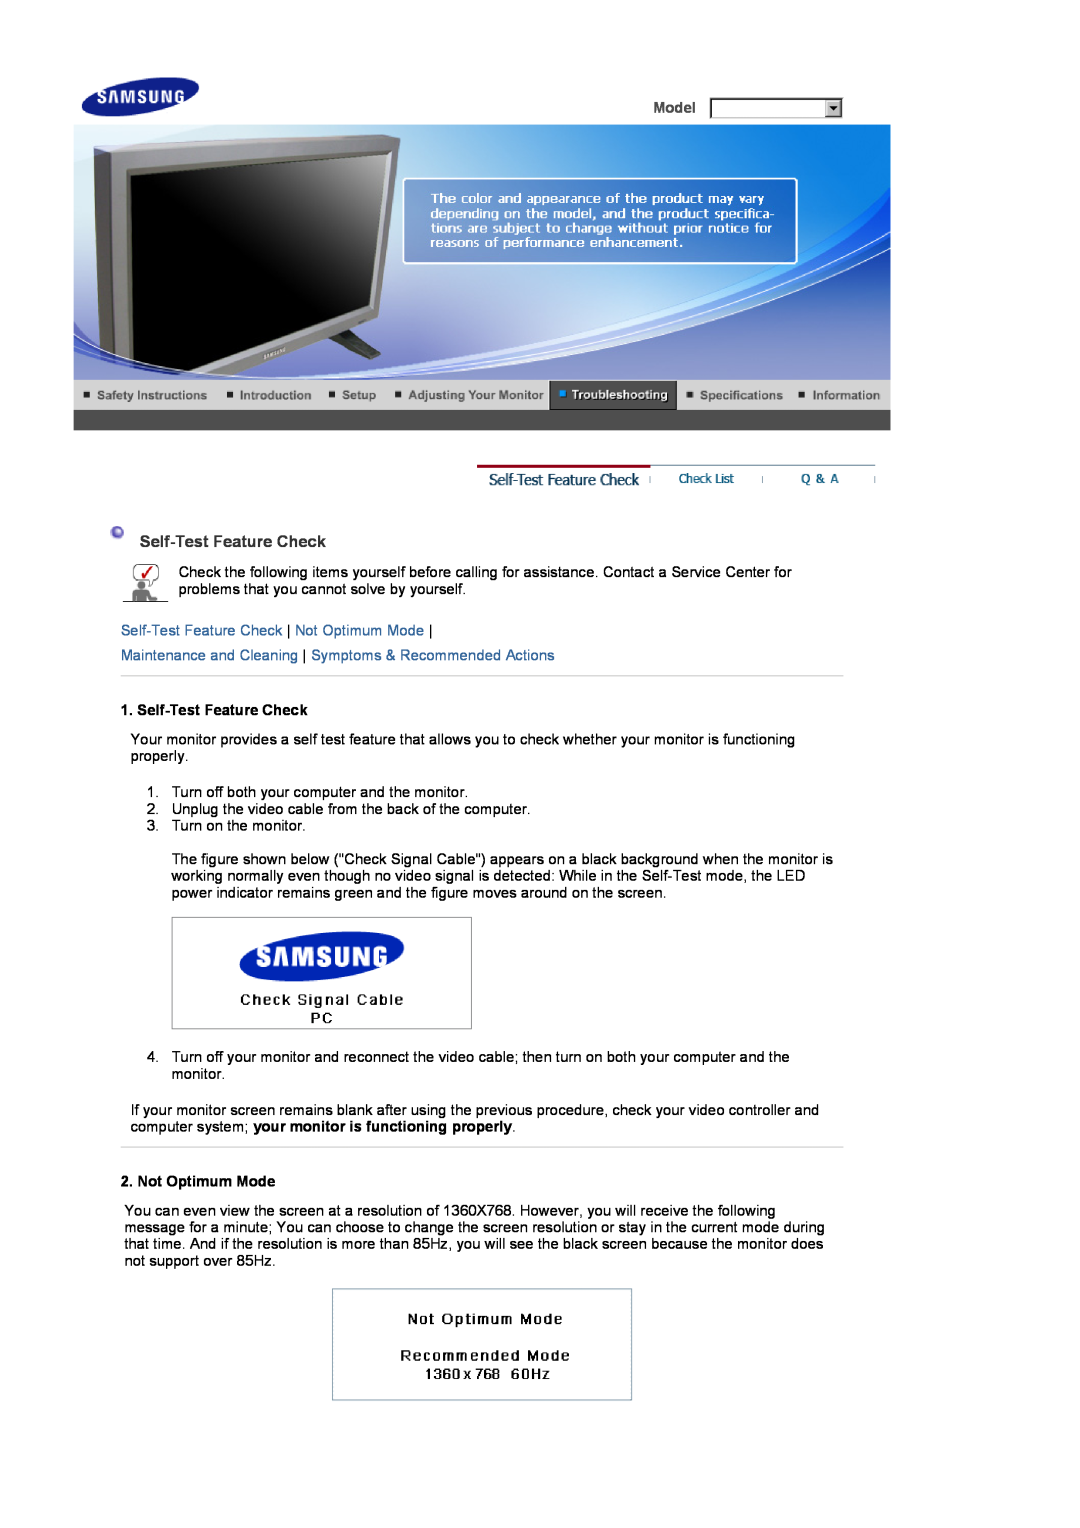 Samsung 320P Self-Test Feature Check Not Optimum Mode, Maintenance and Cleaning Symptoms & Recommended Actions, Model 